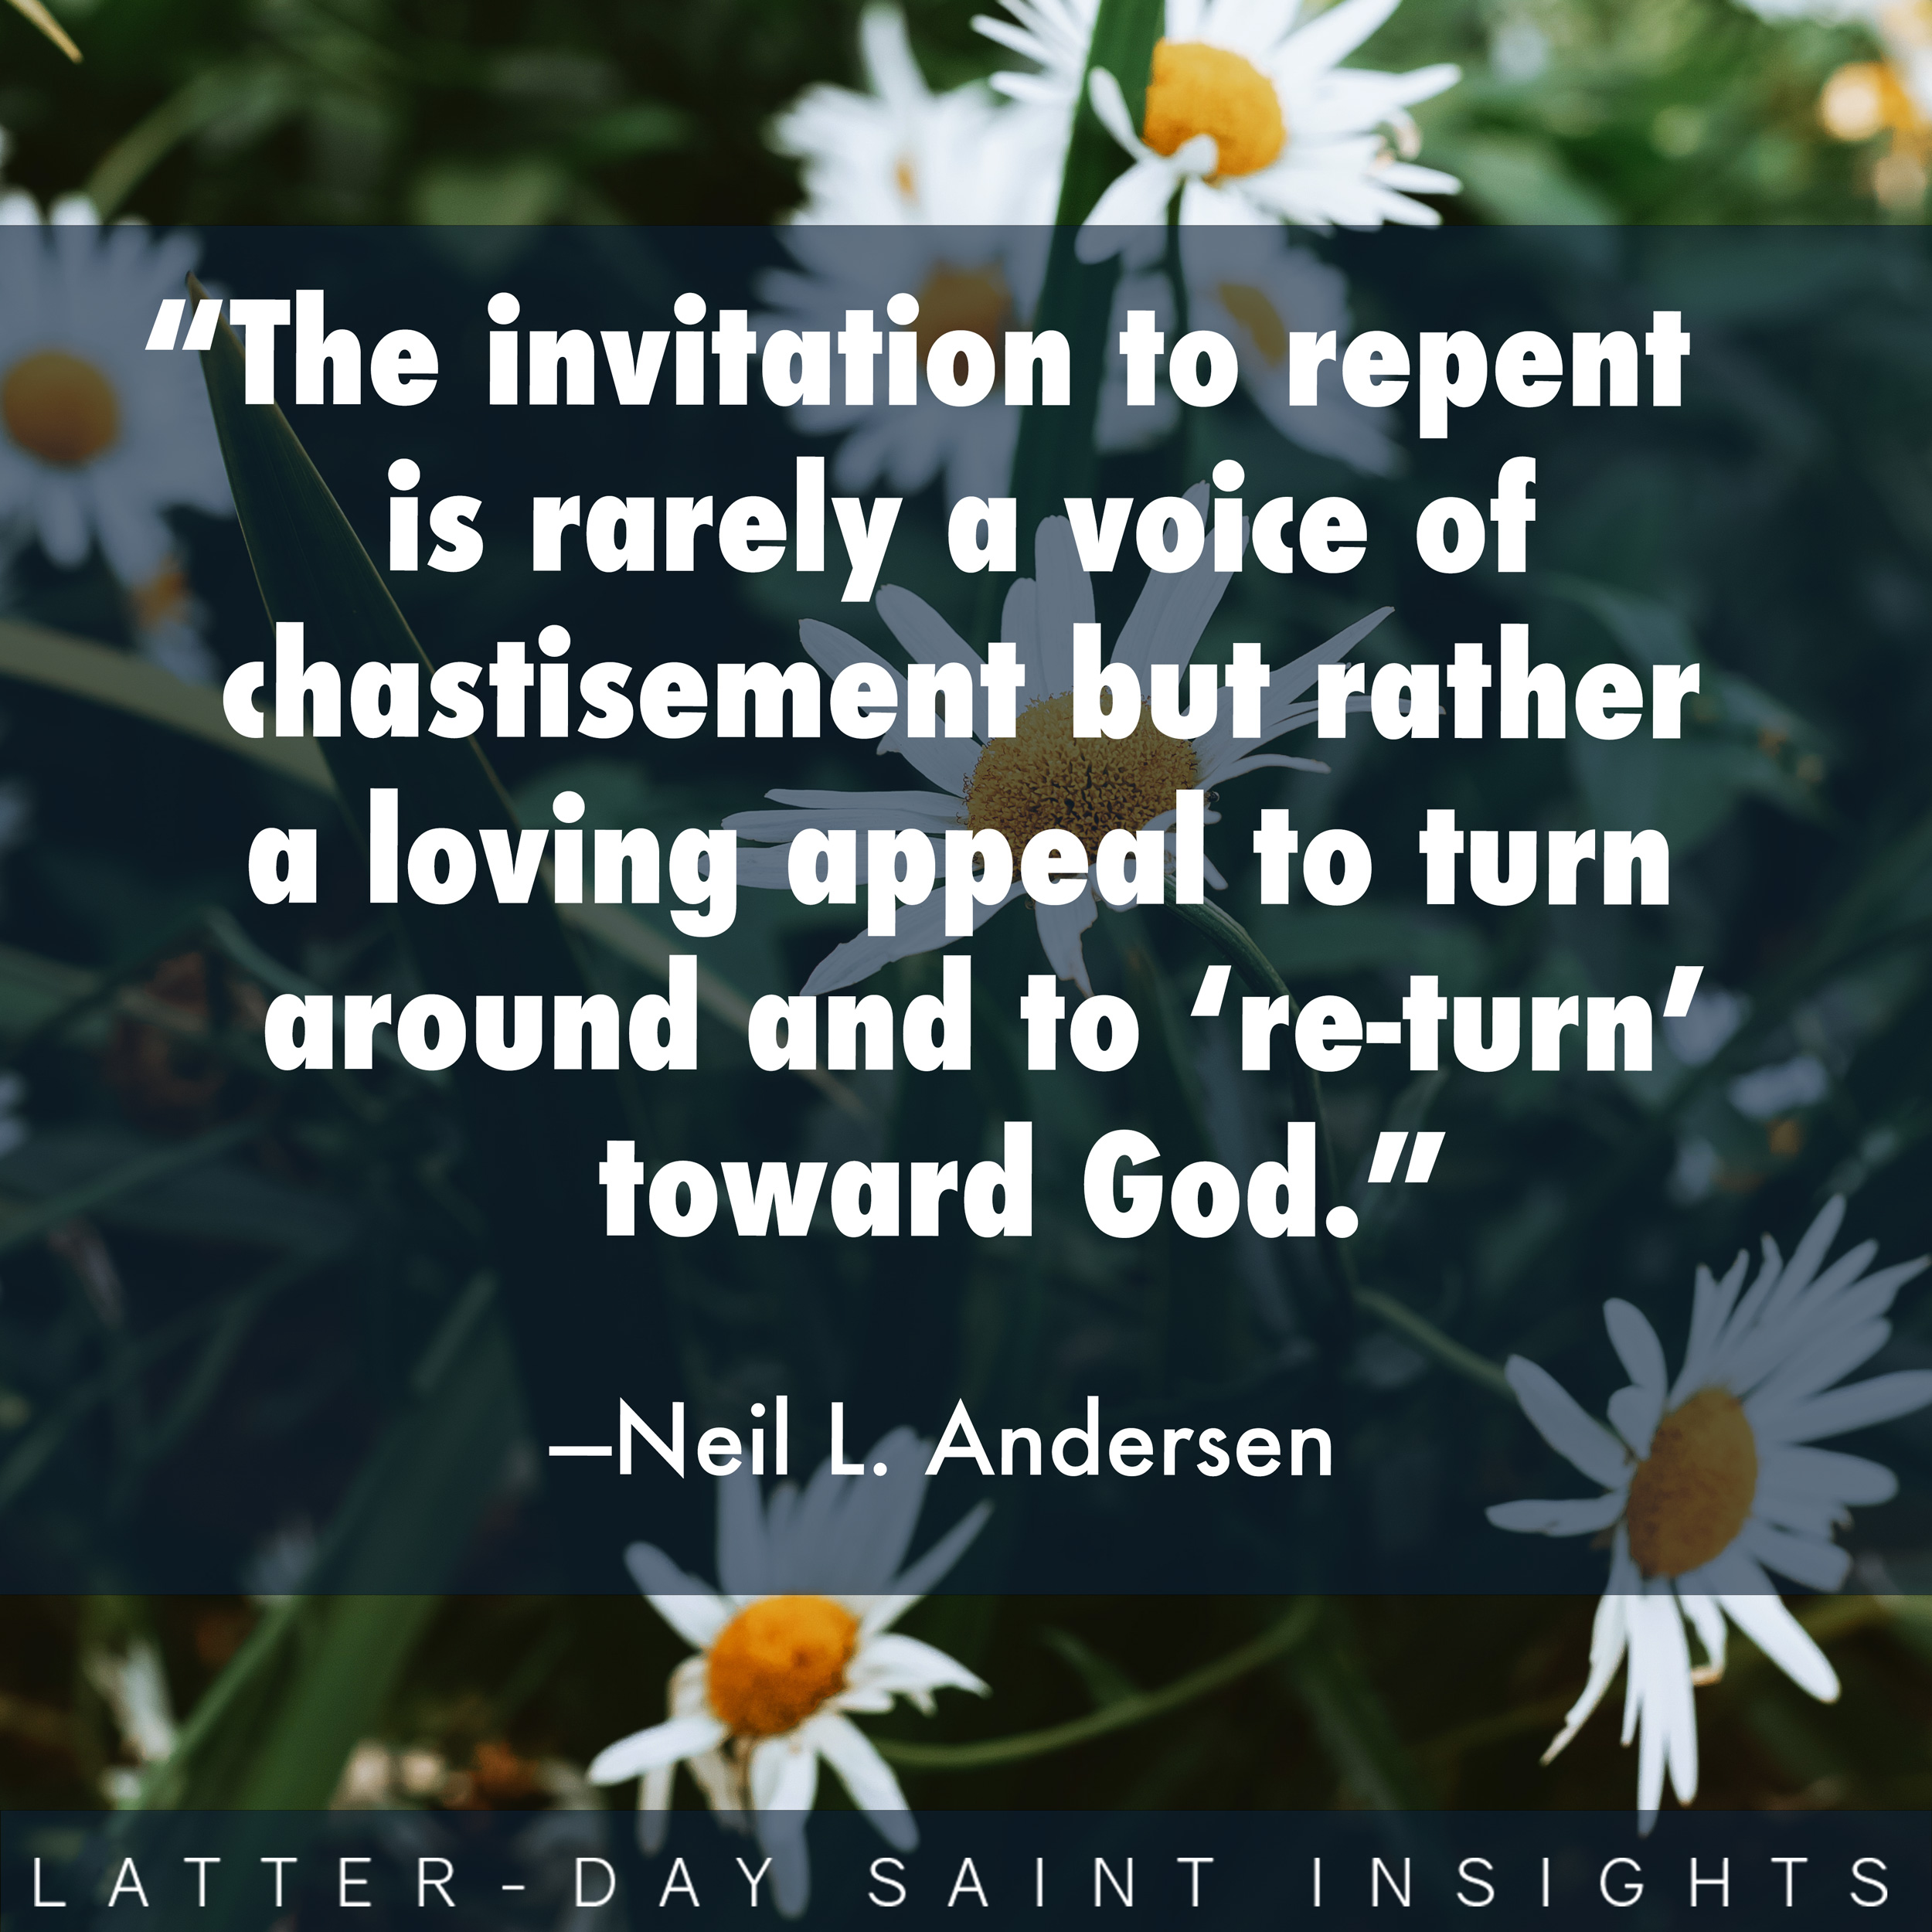 The invitation to repent is rarely a voice of chastisement but rather a loving appeal to turn around and to “re-turn” toward God. - Neil L. Andersen